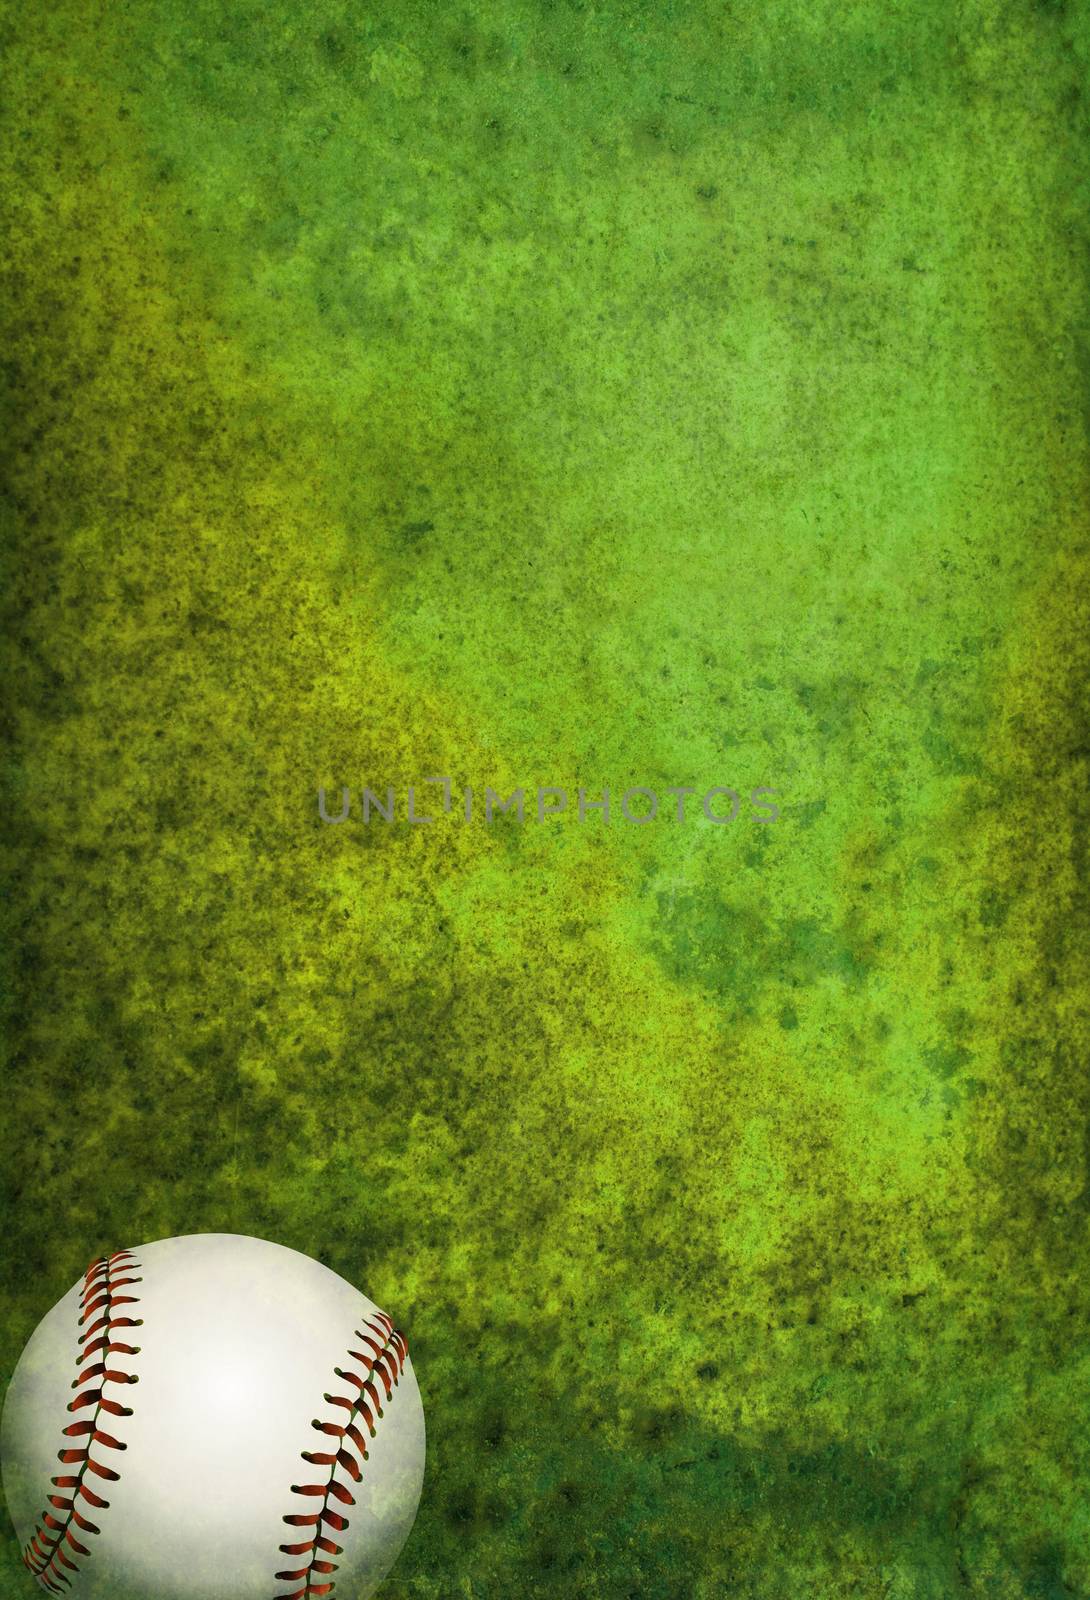 Textured Baseball Field Background with Ball by enterlinedesign